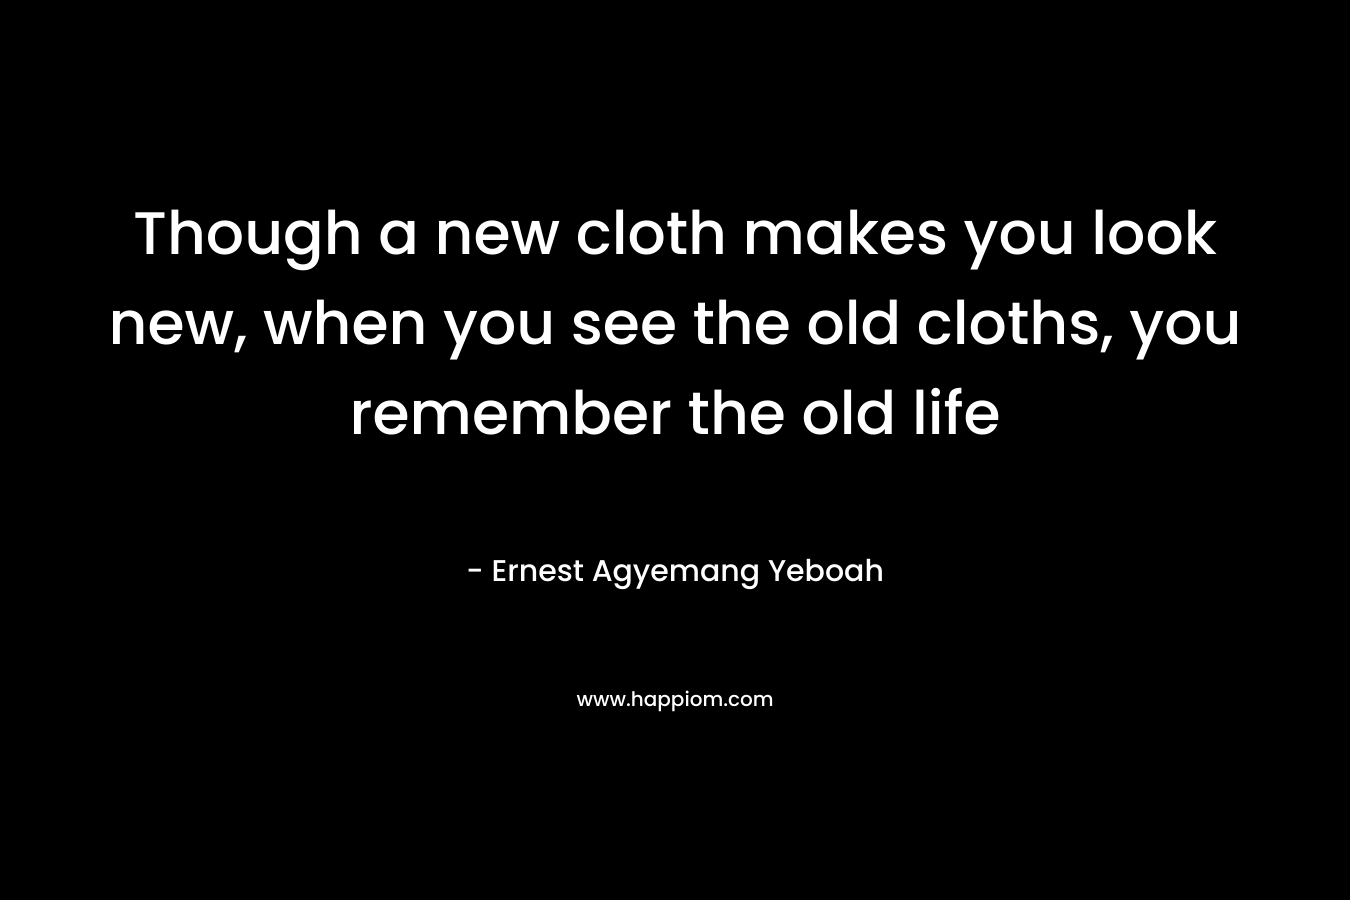 Though a new cloth makes you look new, when you see the old cloths, you remember the old life